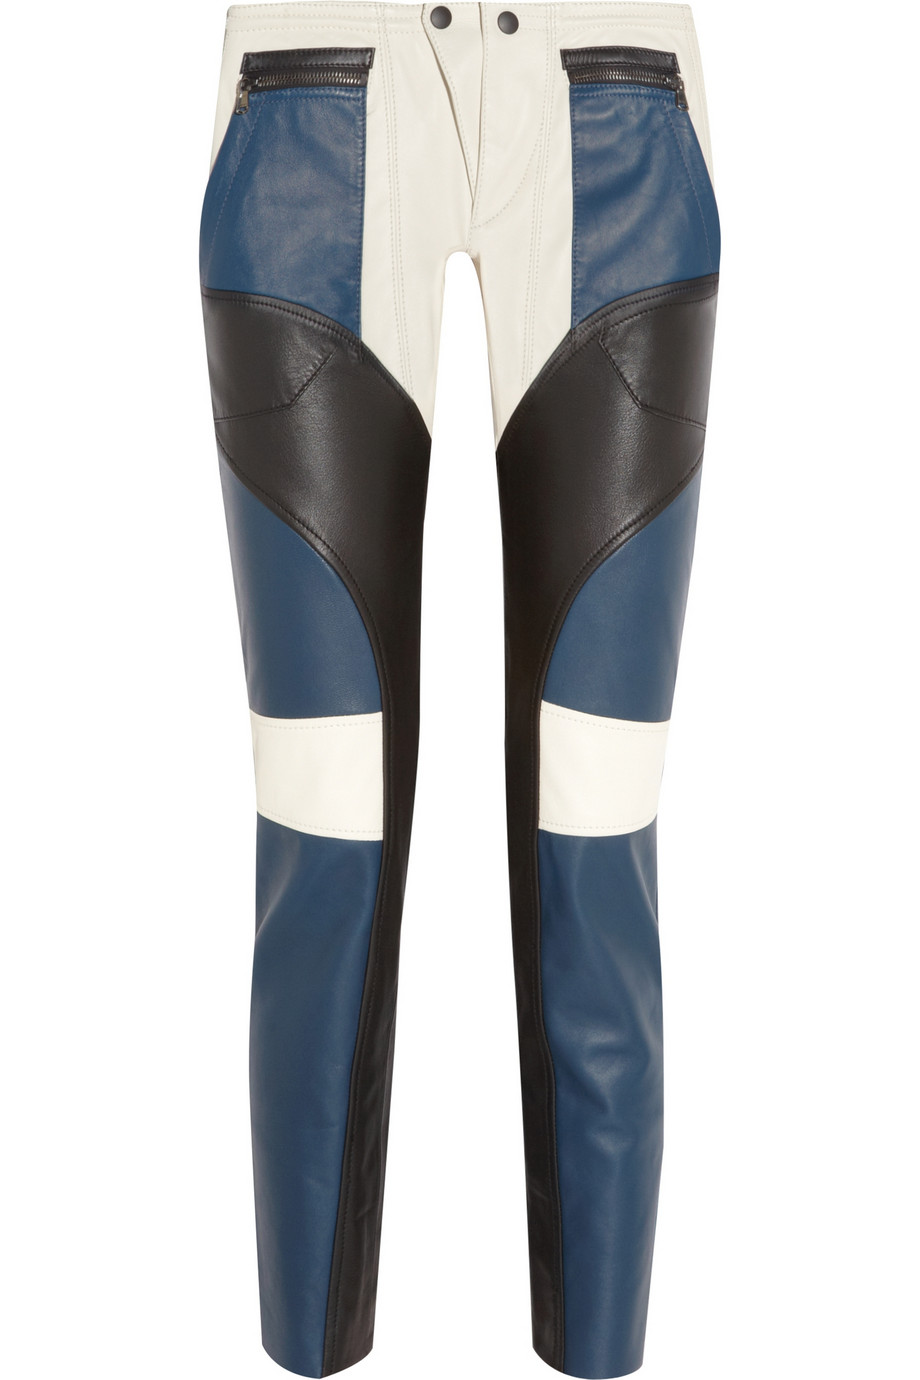 womens leather riding pants